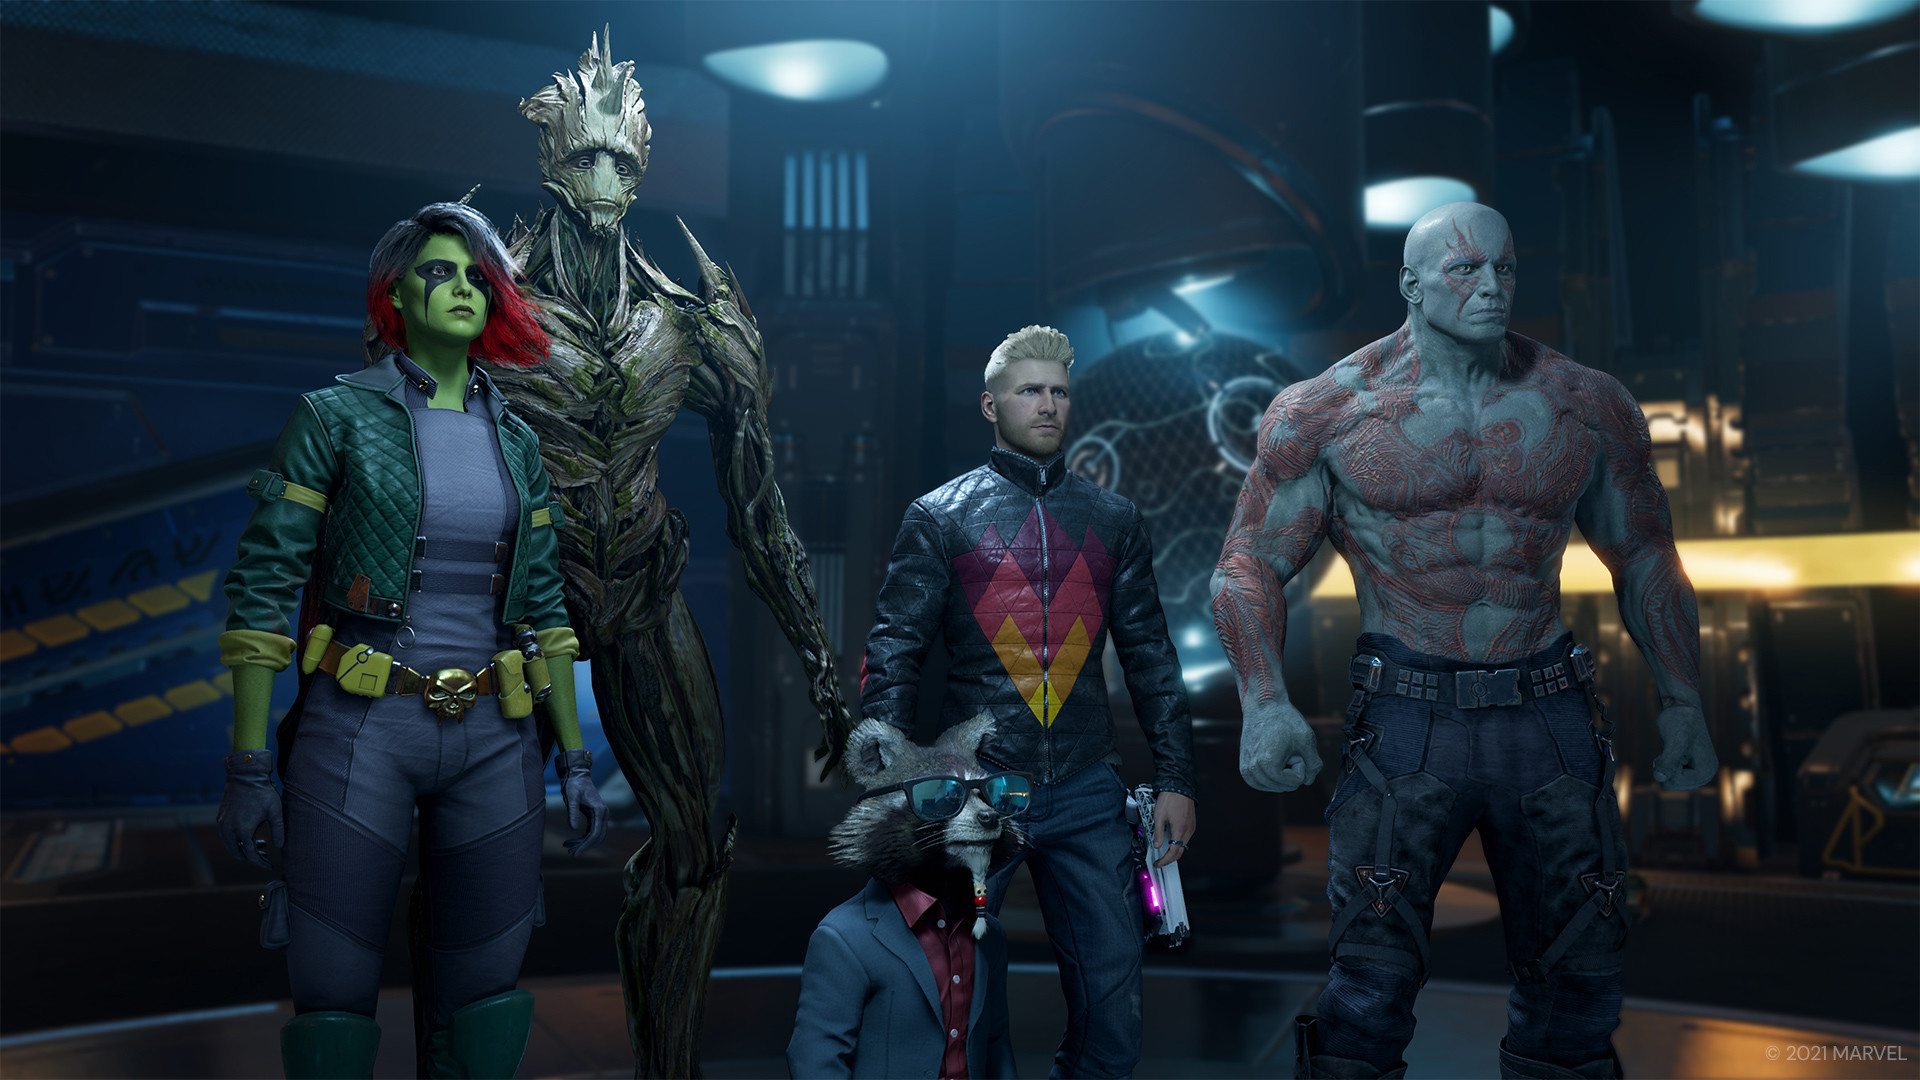 Marvel's Guardians of the Galaxy Free Download